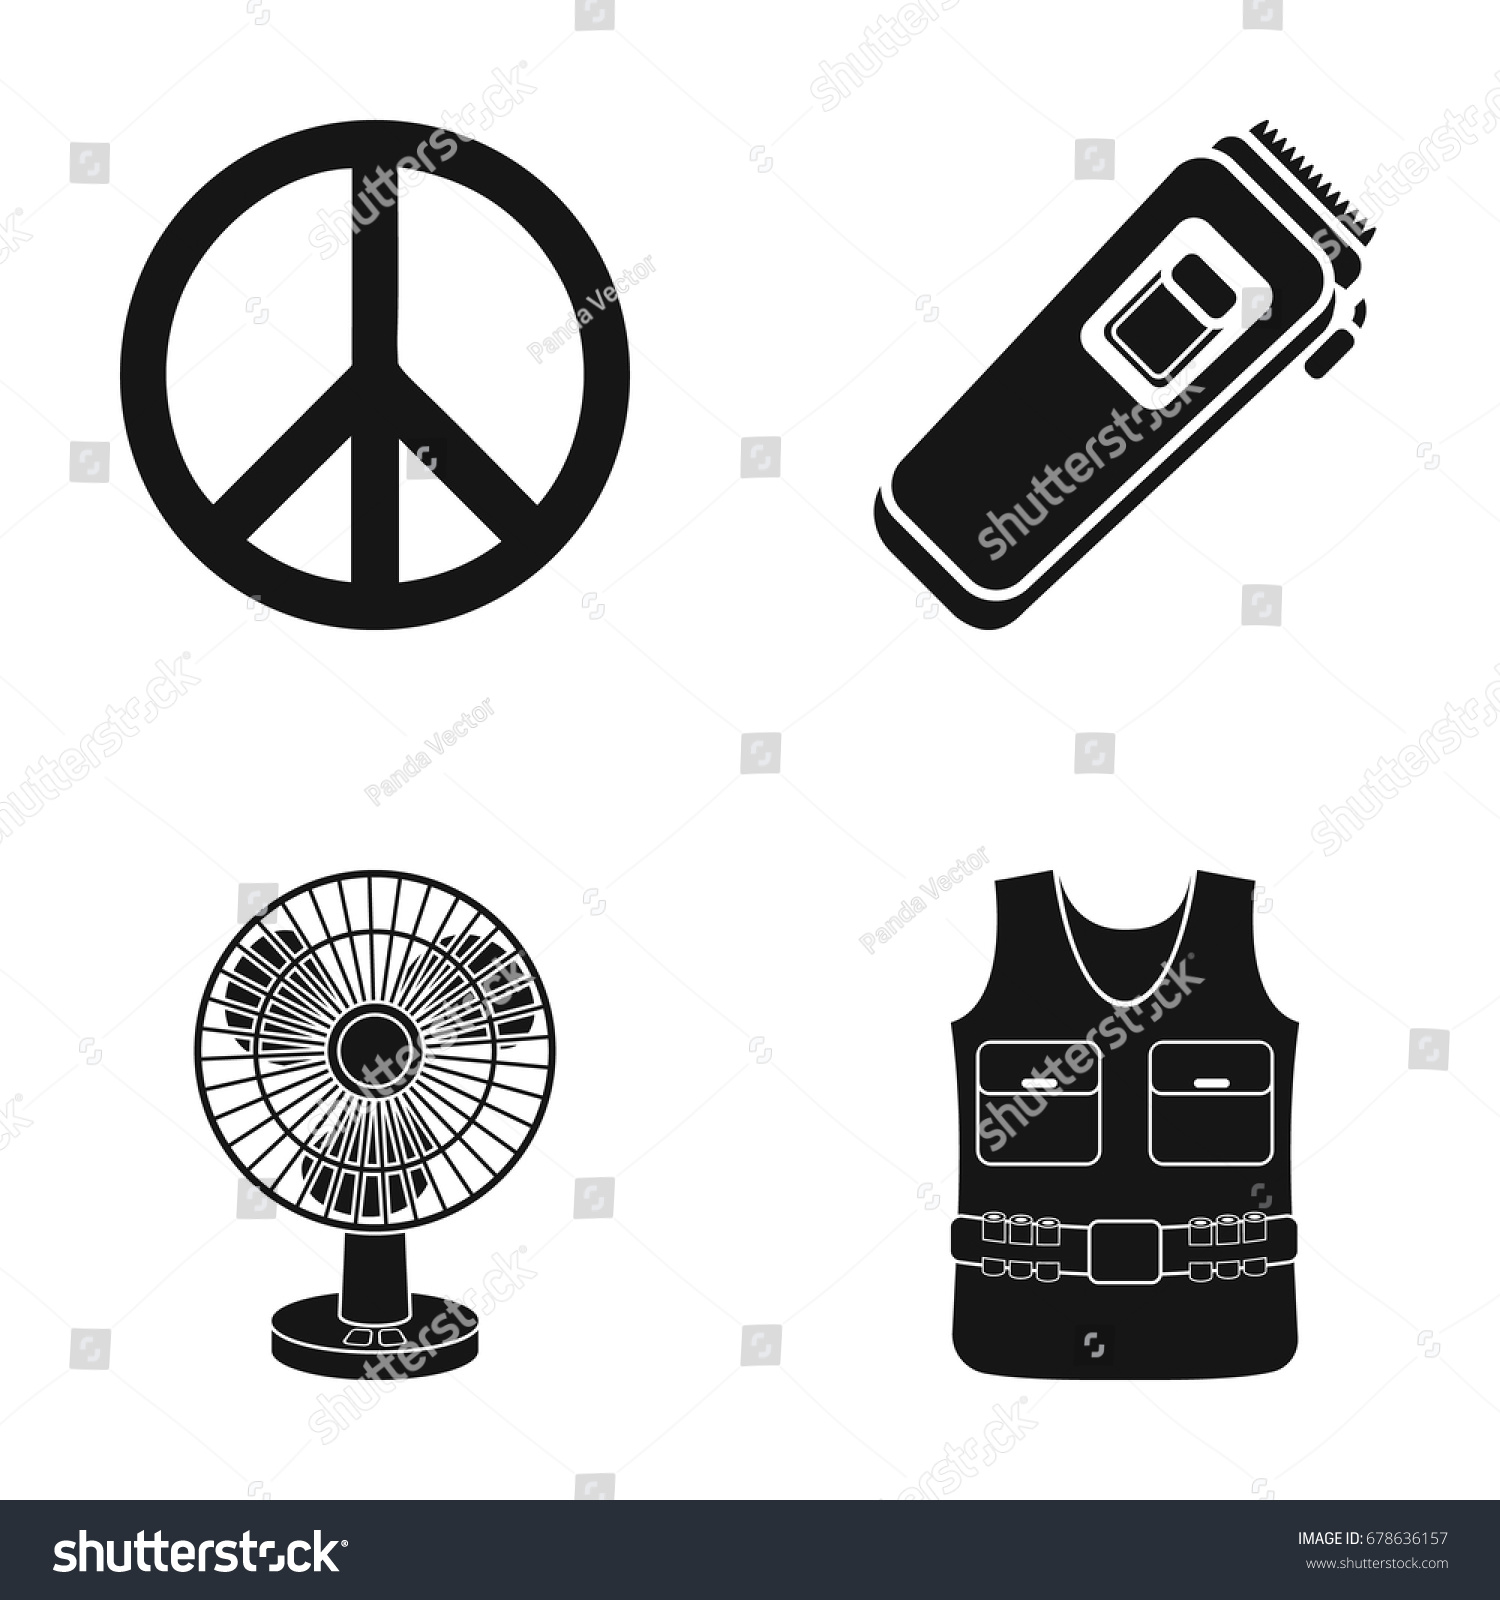 Bullet proof vest body armor suit icon flat Vector Image